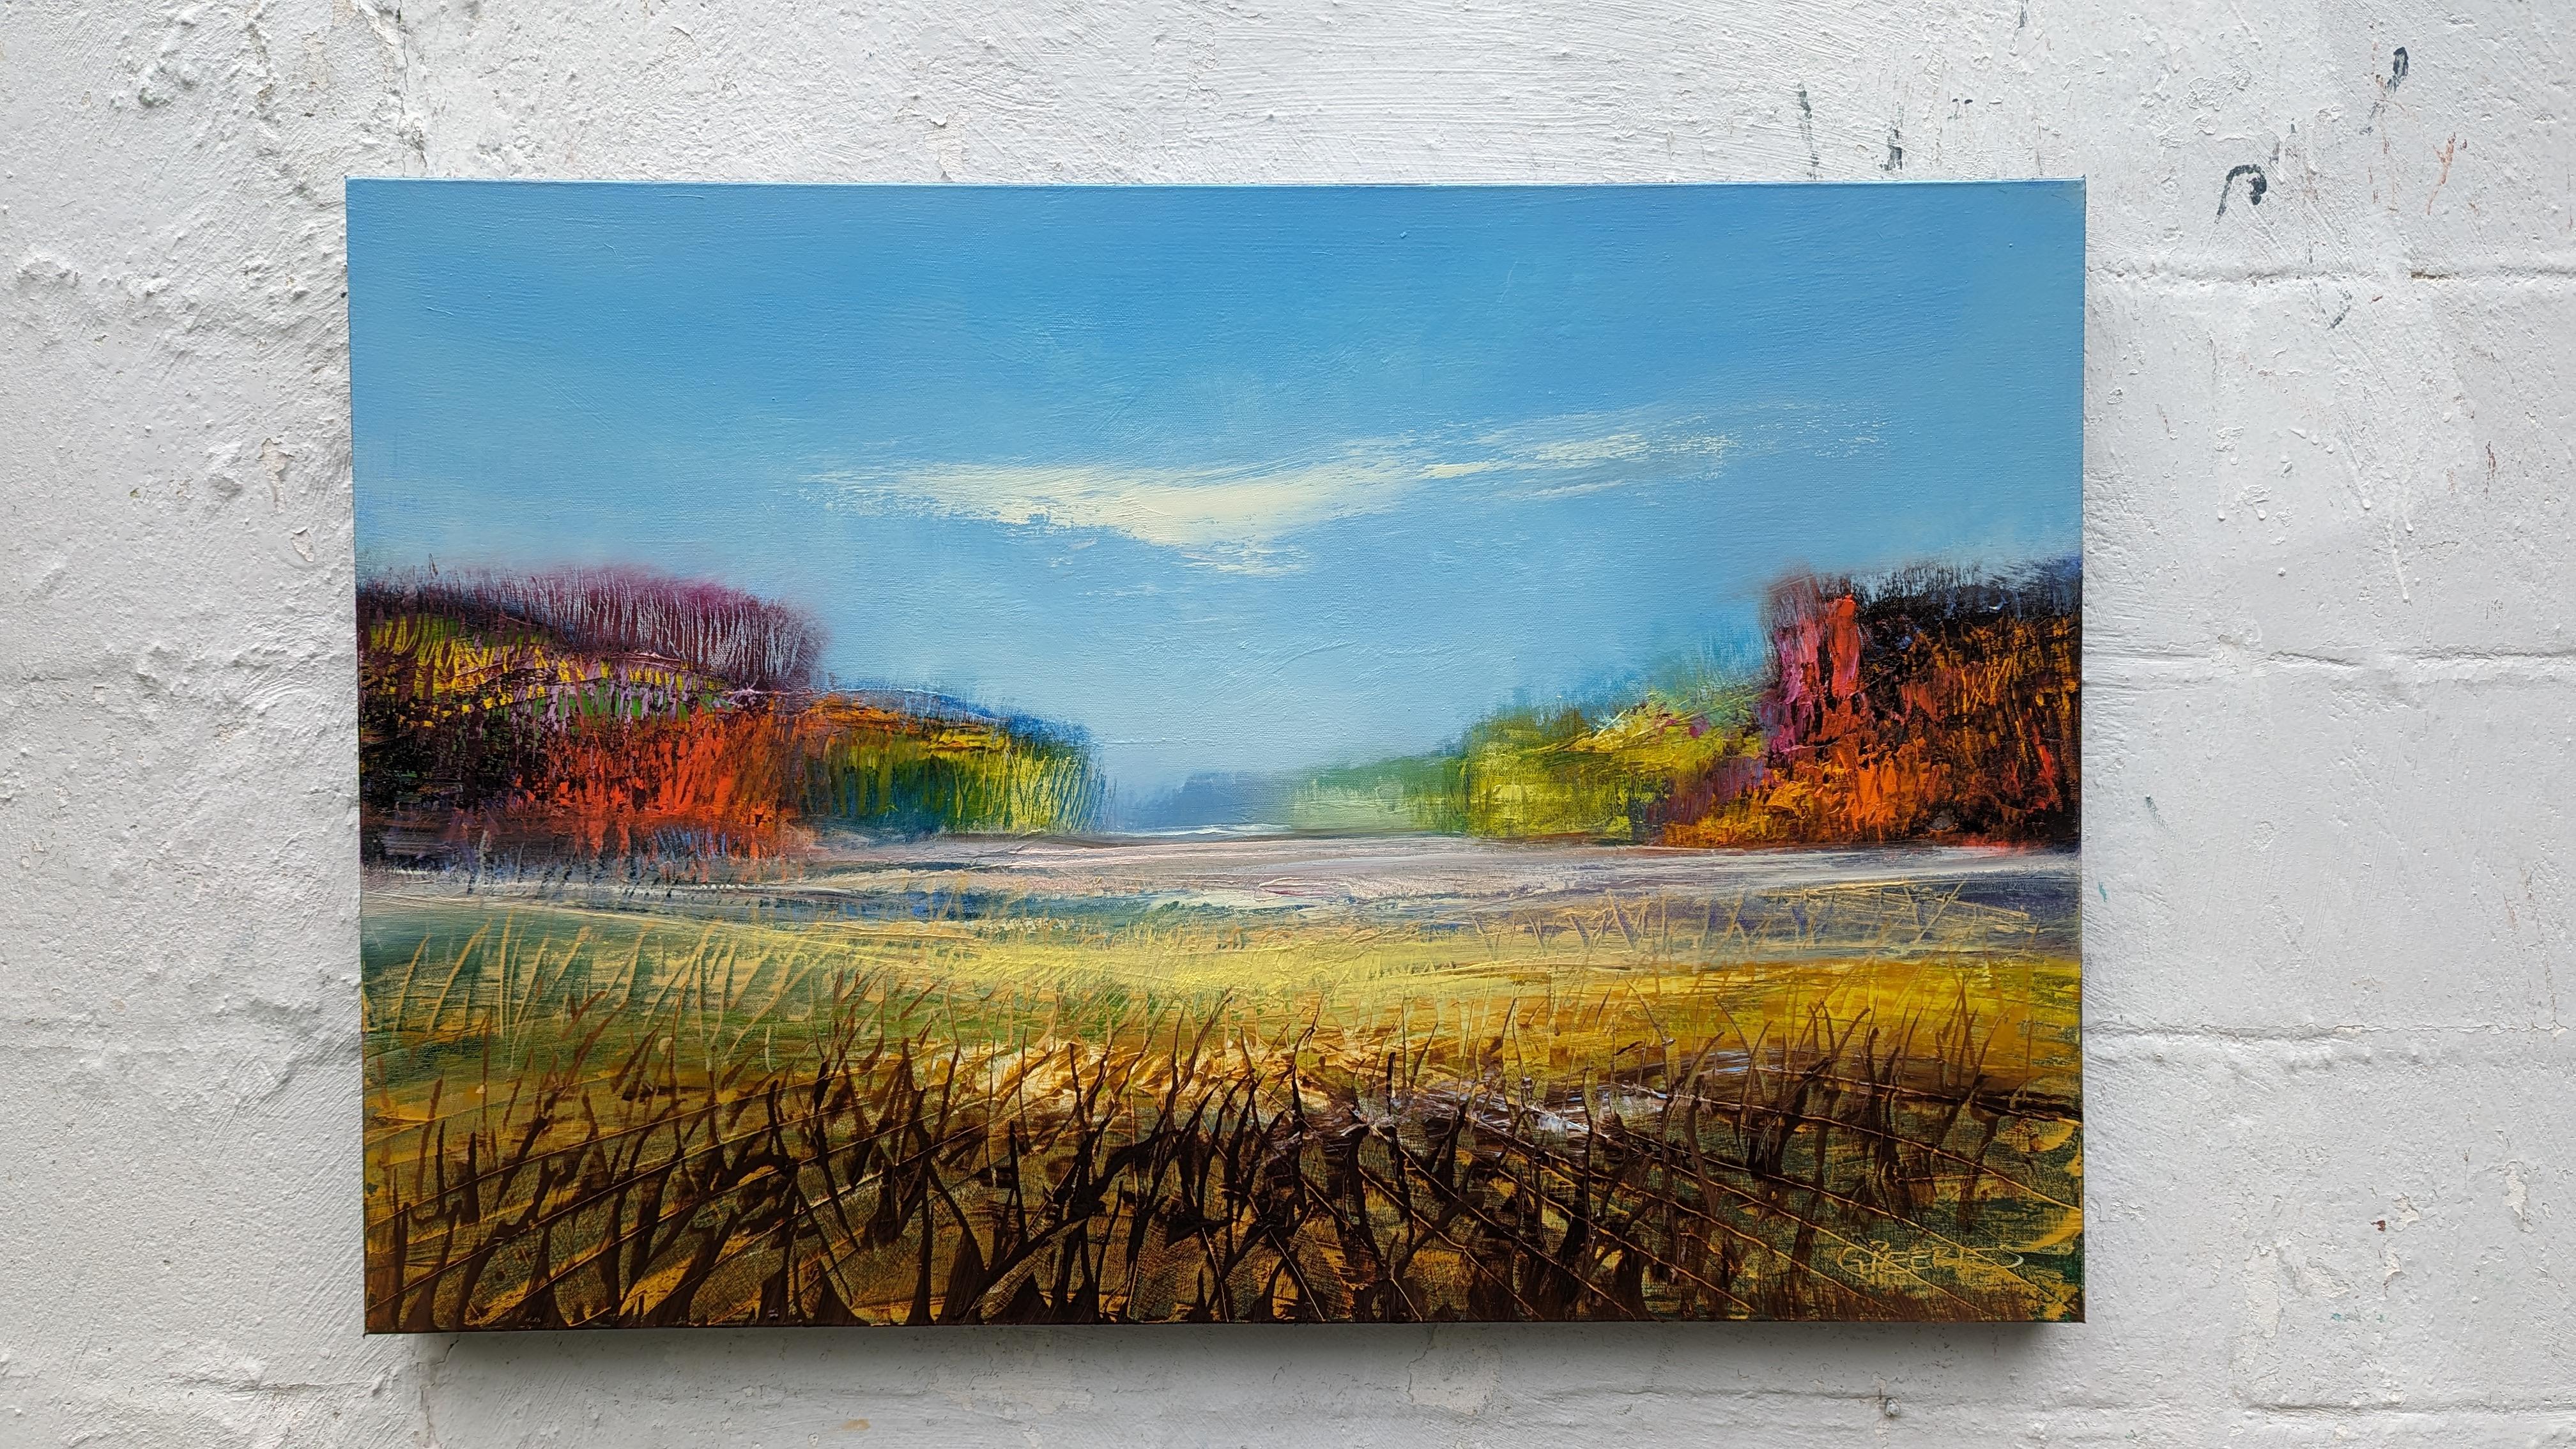 <p>Artist Comments<br>Artist George Peebles presents an expressionist landscape shifting as autumn approaches. The green leaves turn a fiery red as the season changes. George paints light and wispy clouds drifting along the bright blue sky.